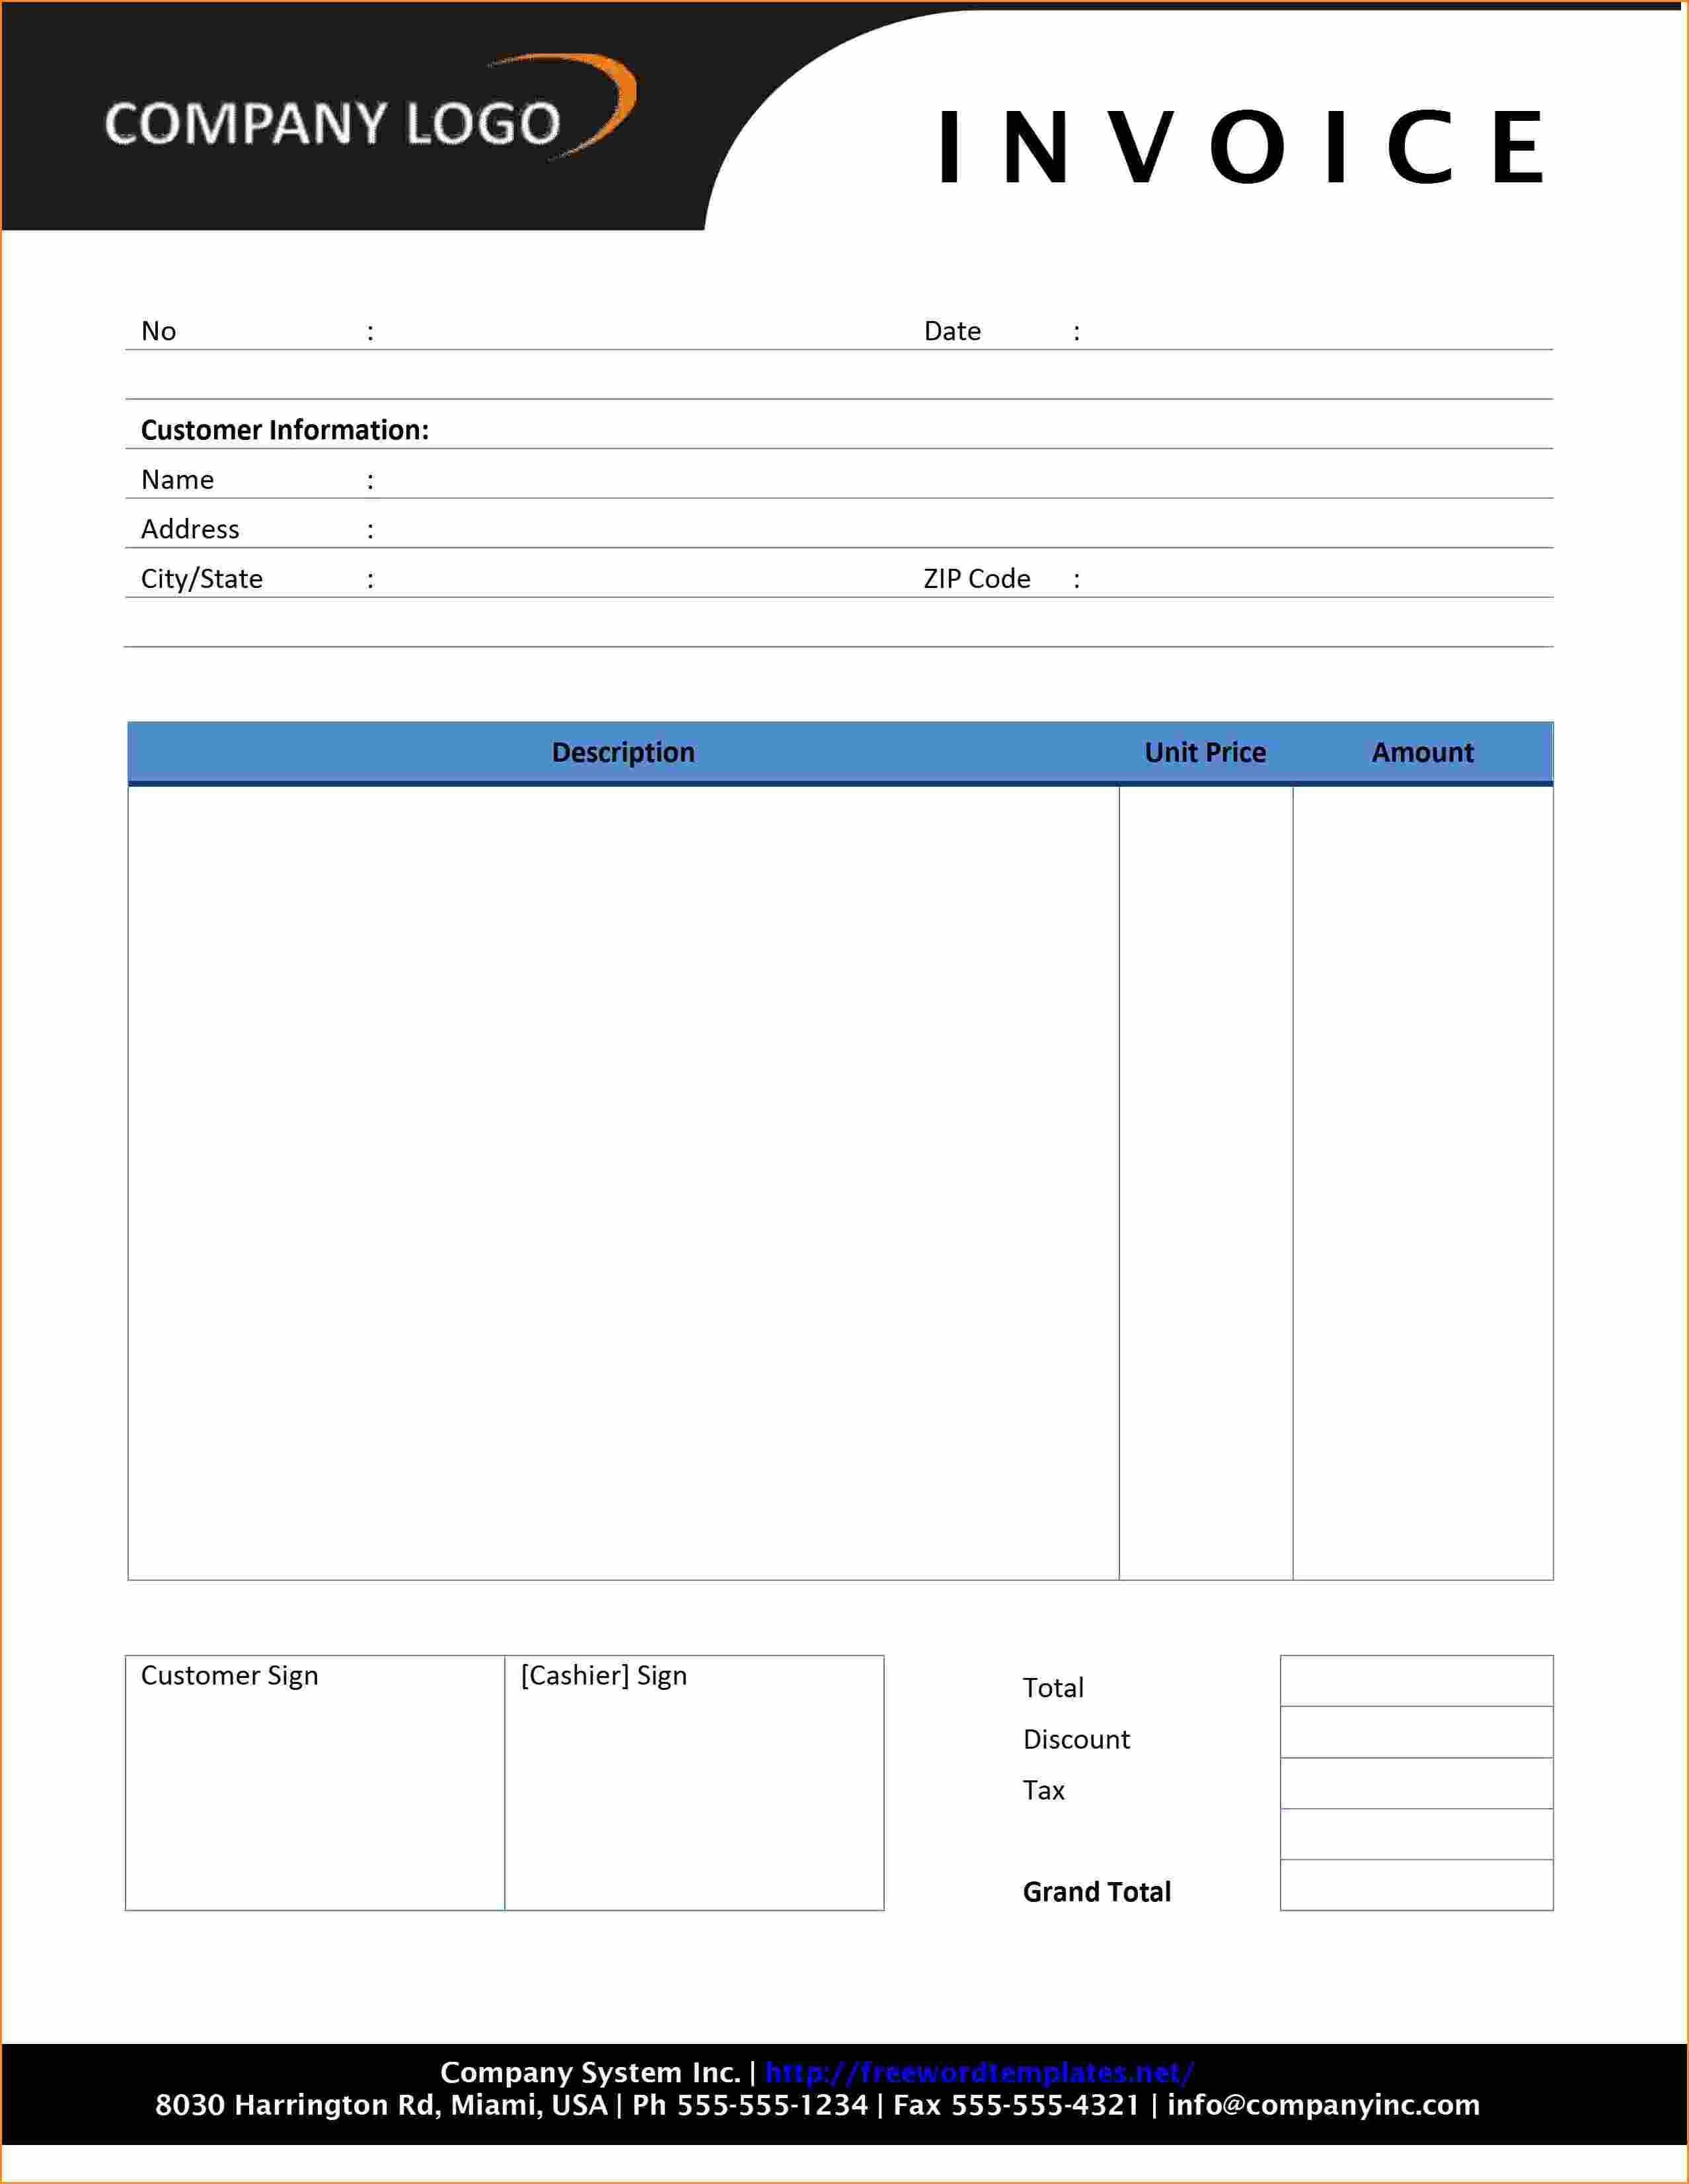 invoice-template-ms-word-invoice-template-ideas